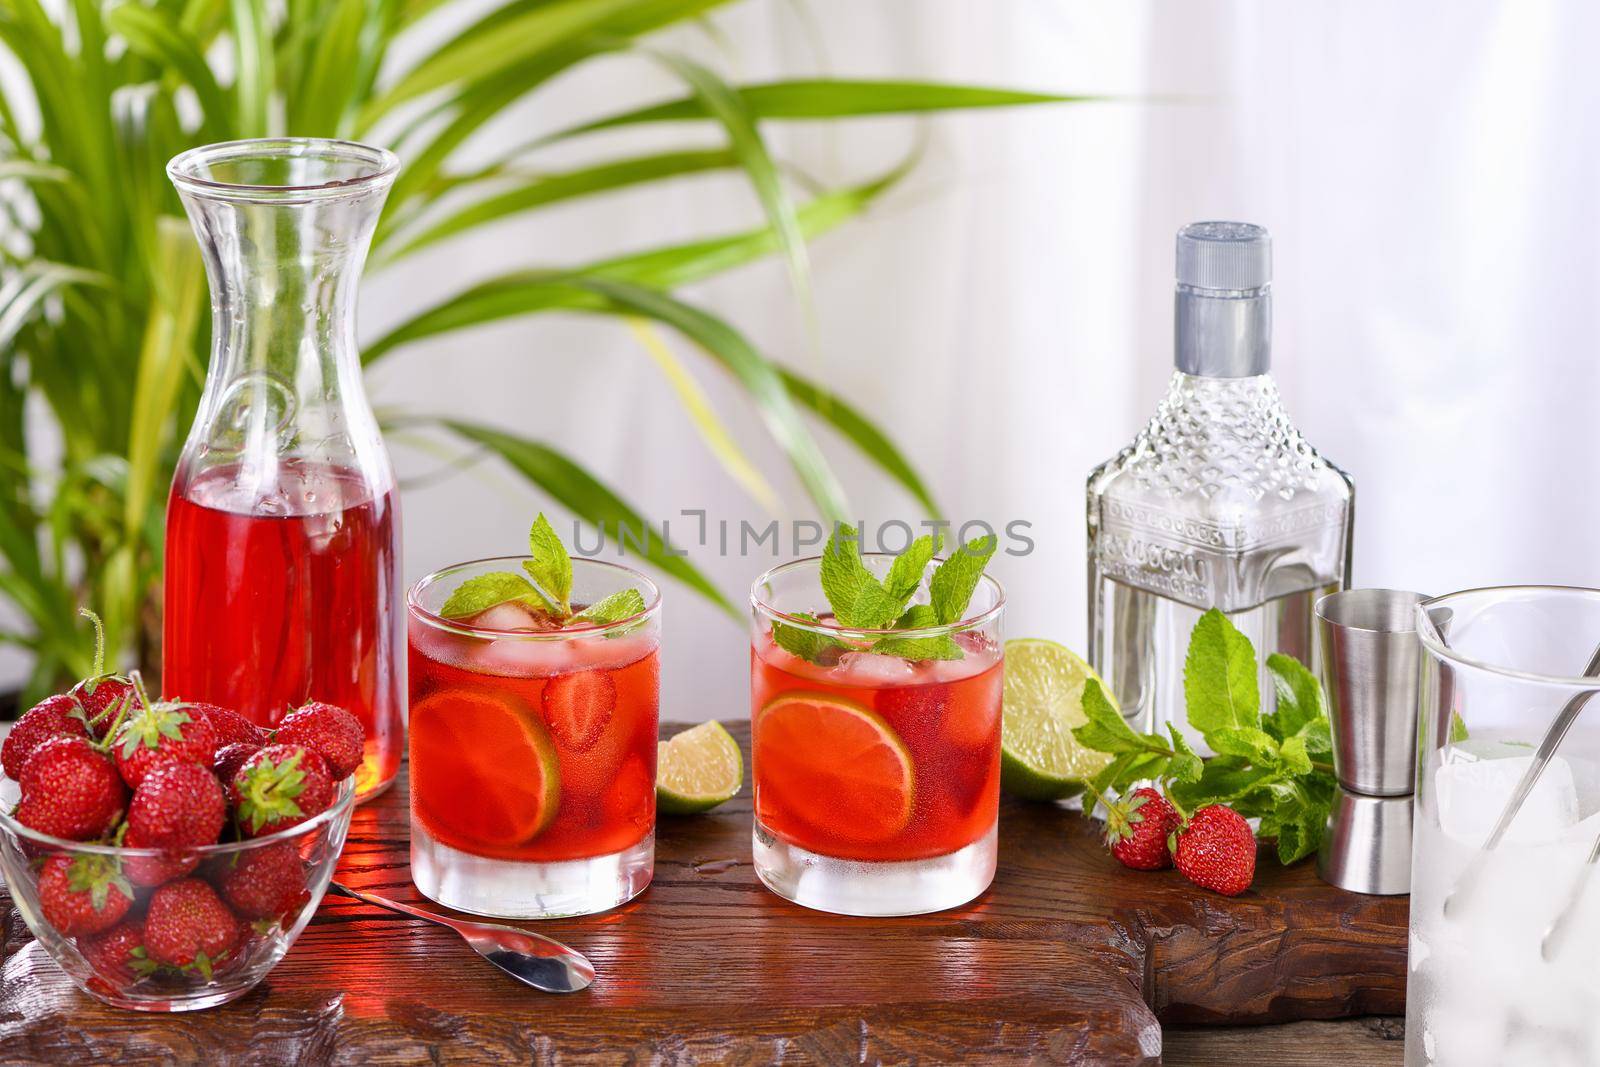 Refreshing cocktail strawberry mojito with ice, fresh mint and lime. A great idea for a picnic or summer party. It may contain alcohol or be a mocktail.